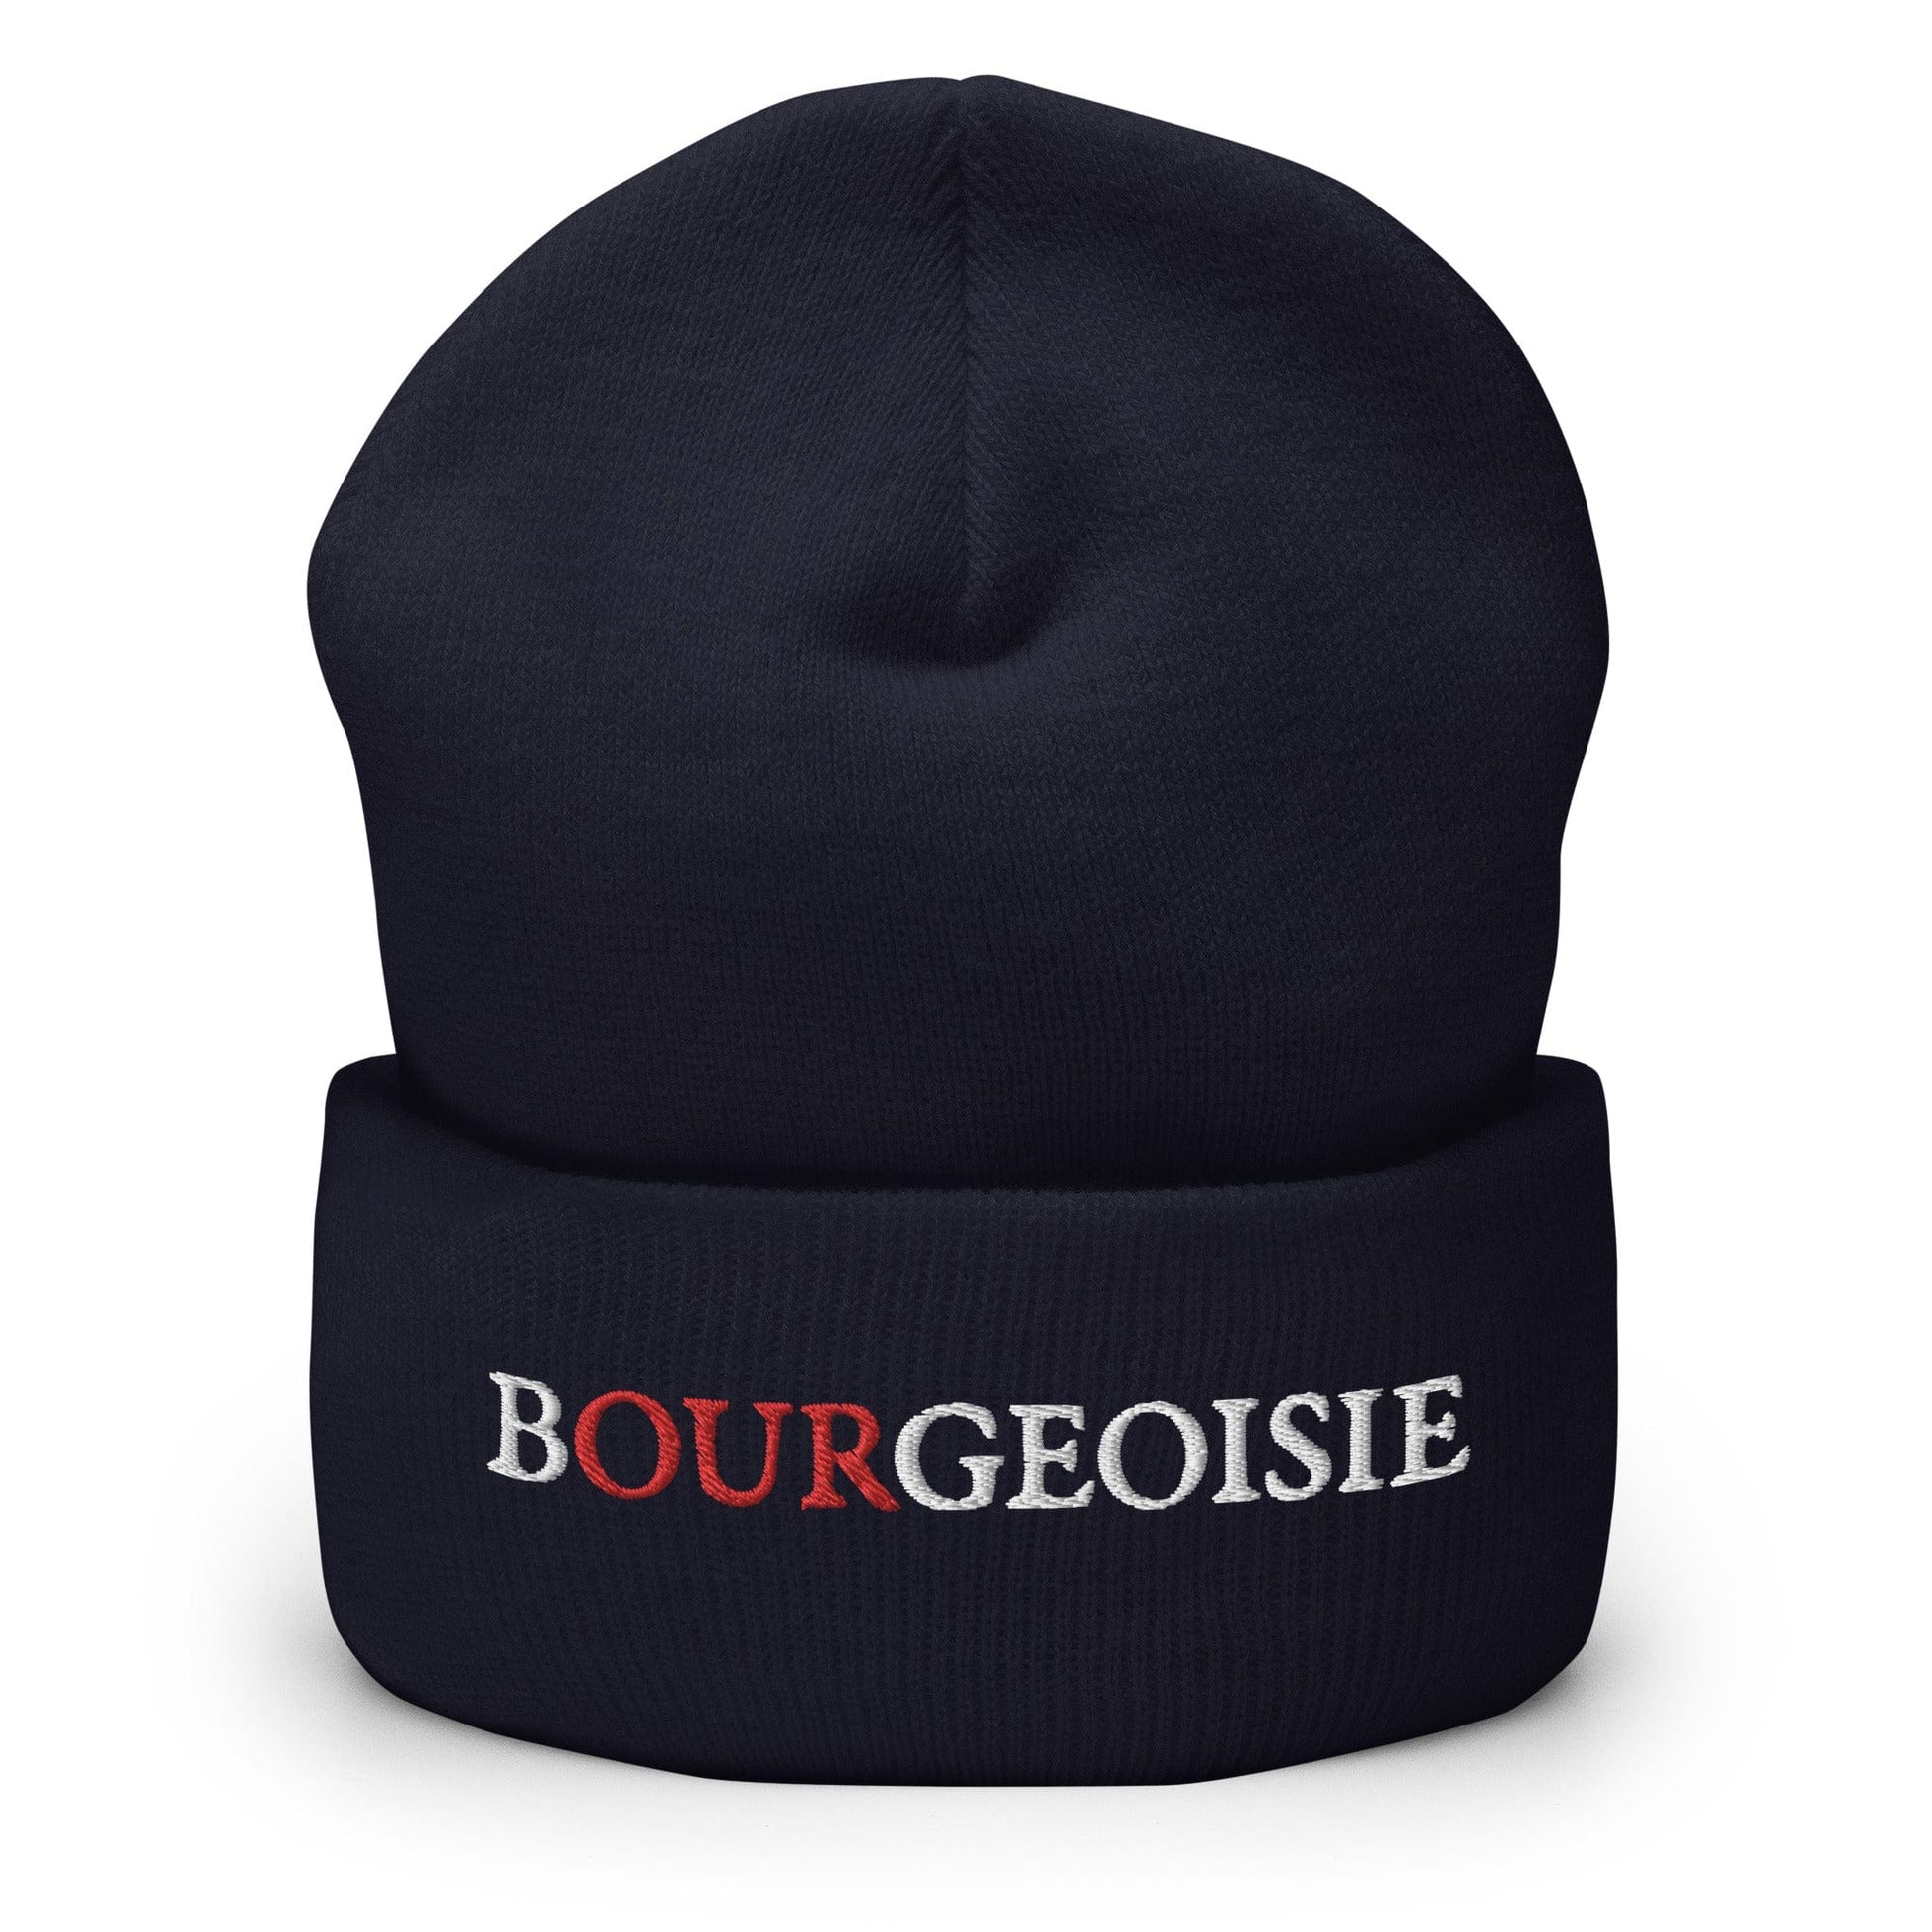 Bourgeoisie - Embroidered Beanie Hat